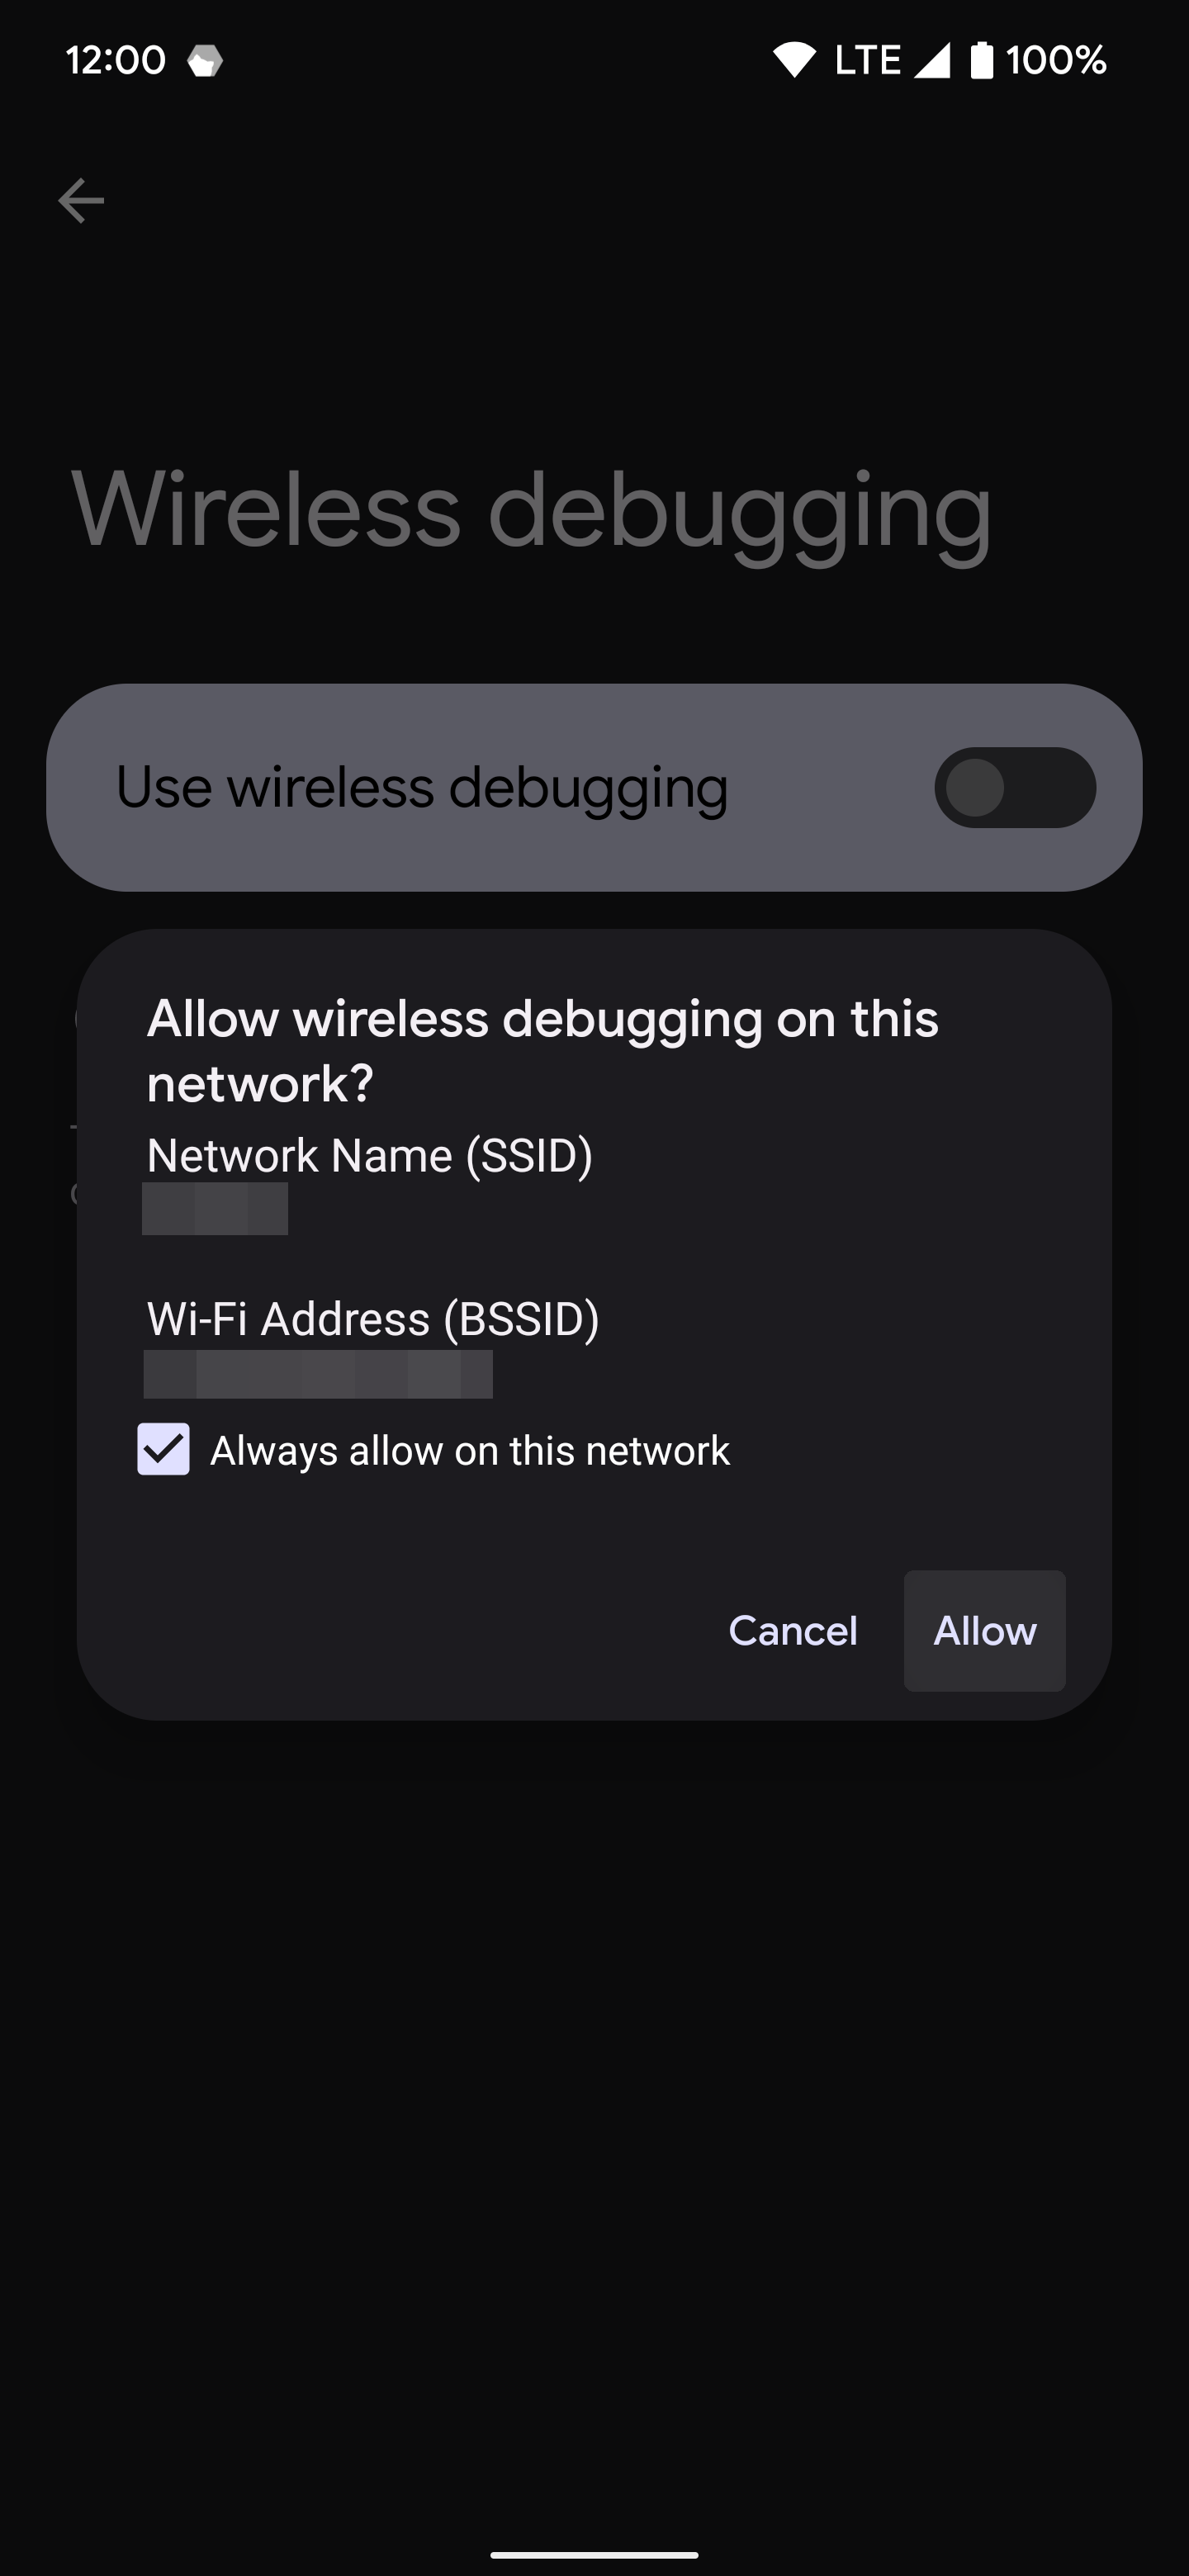 Allowing Wireless debugging access to the local Wi-Fi network.